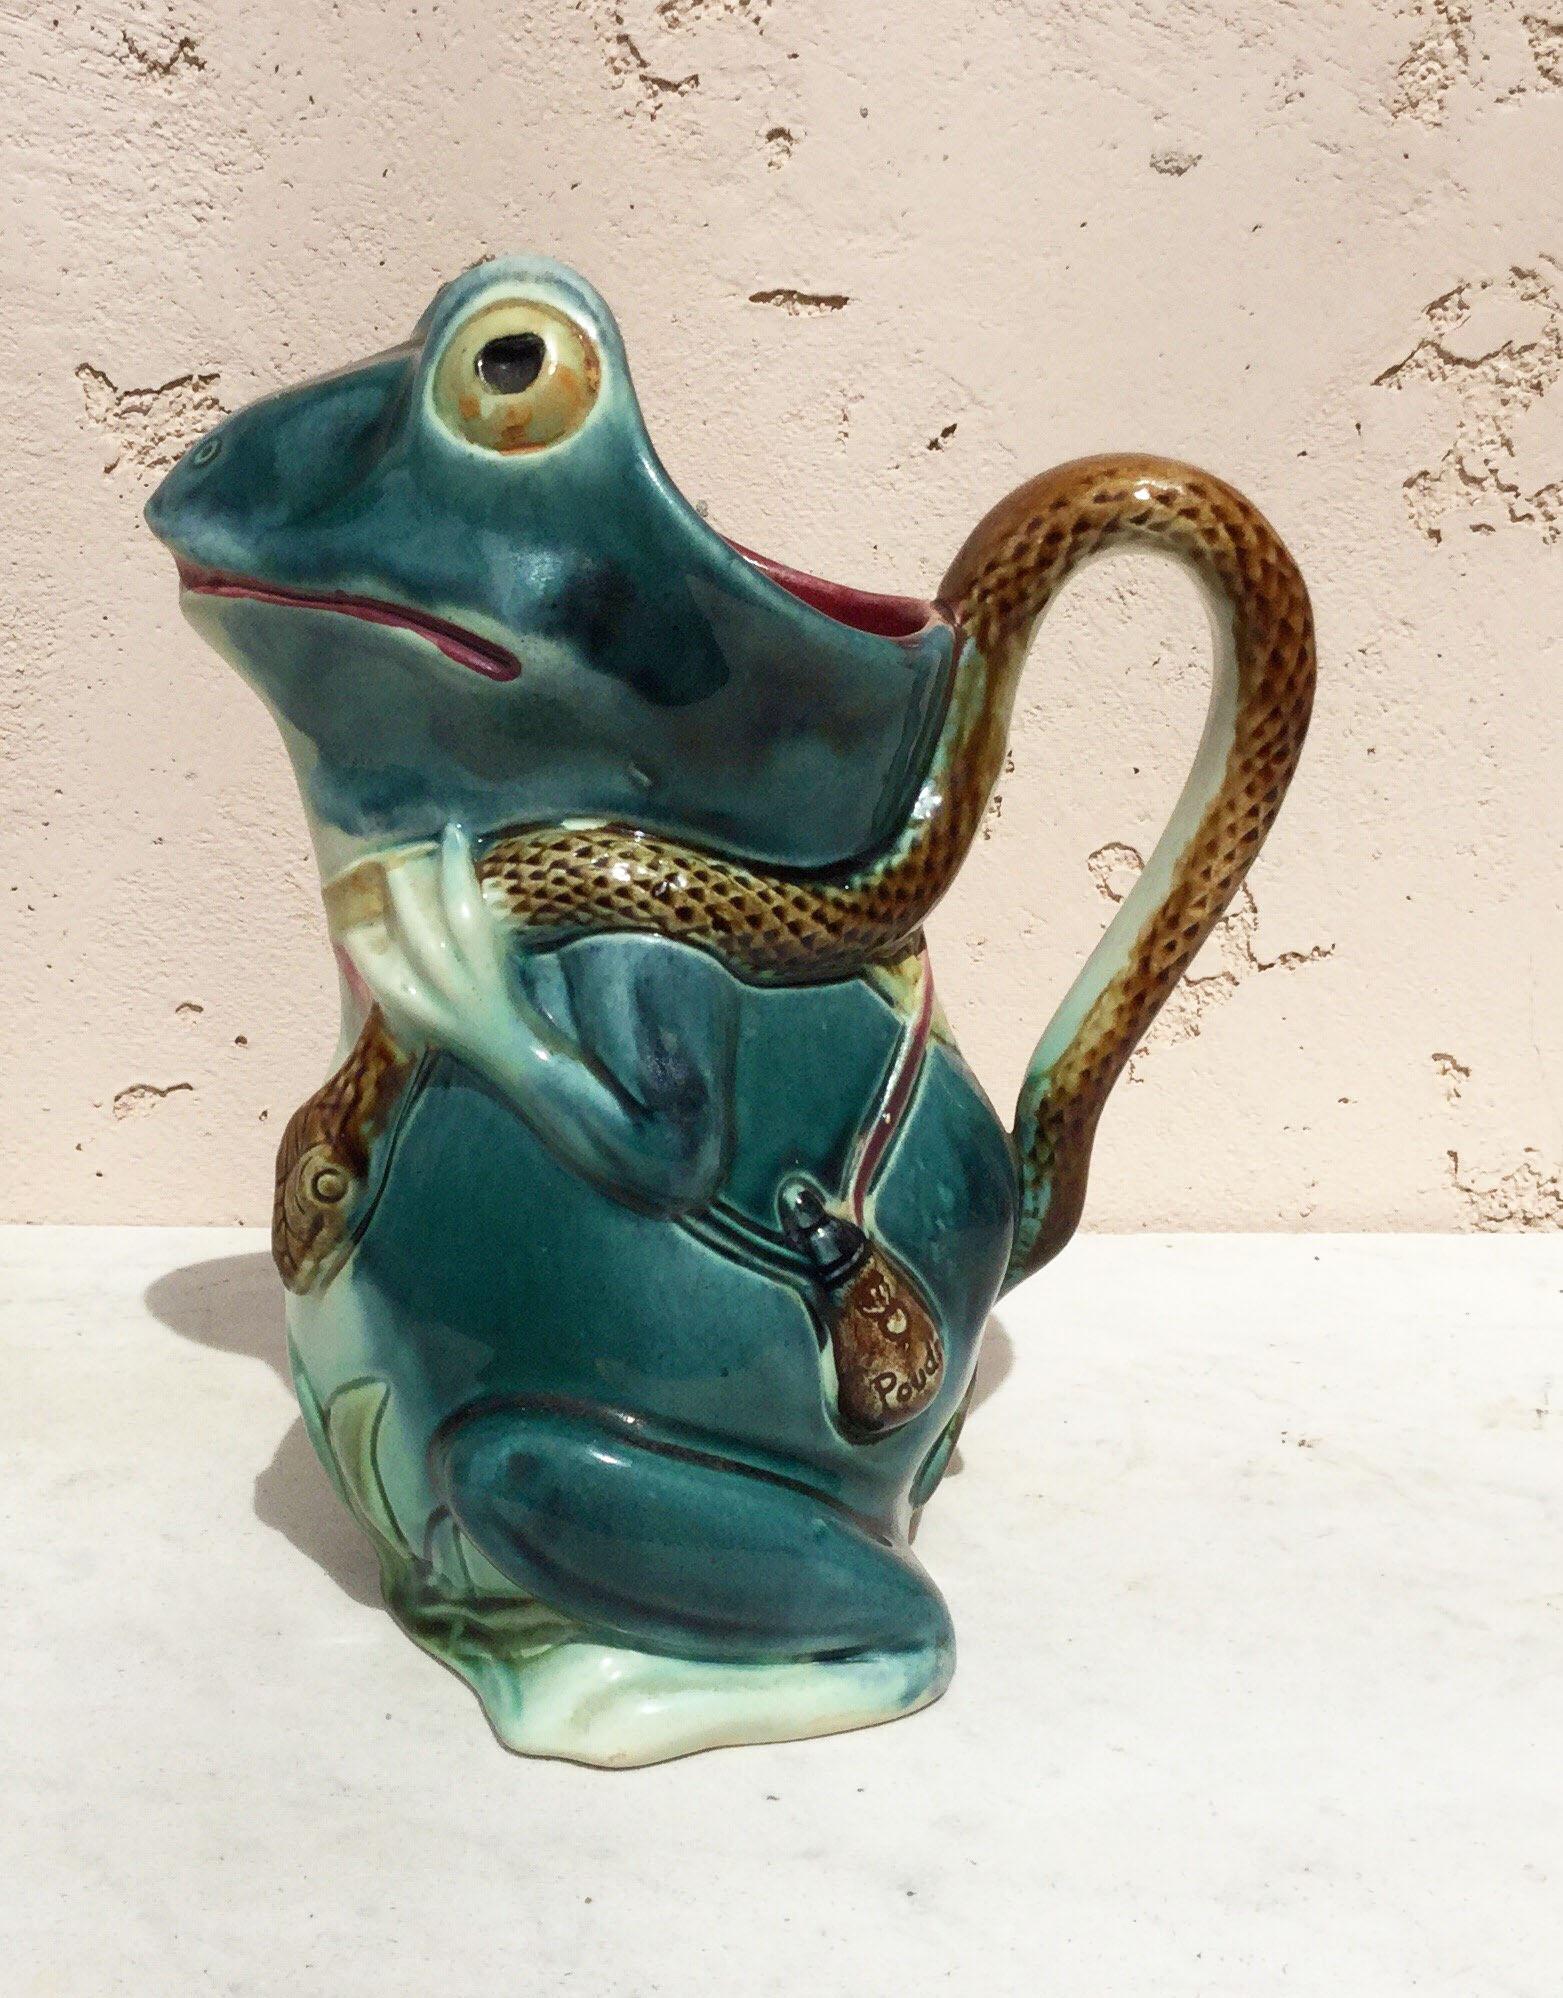 Unusual majolica frog pitcher with a gun and bags, the handle is a snake, circa 1890, marked Orchies.